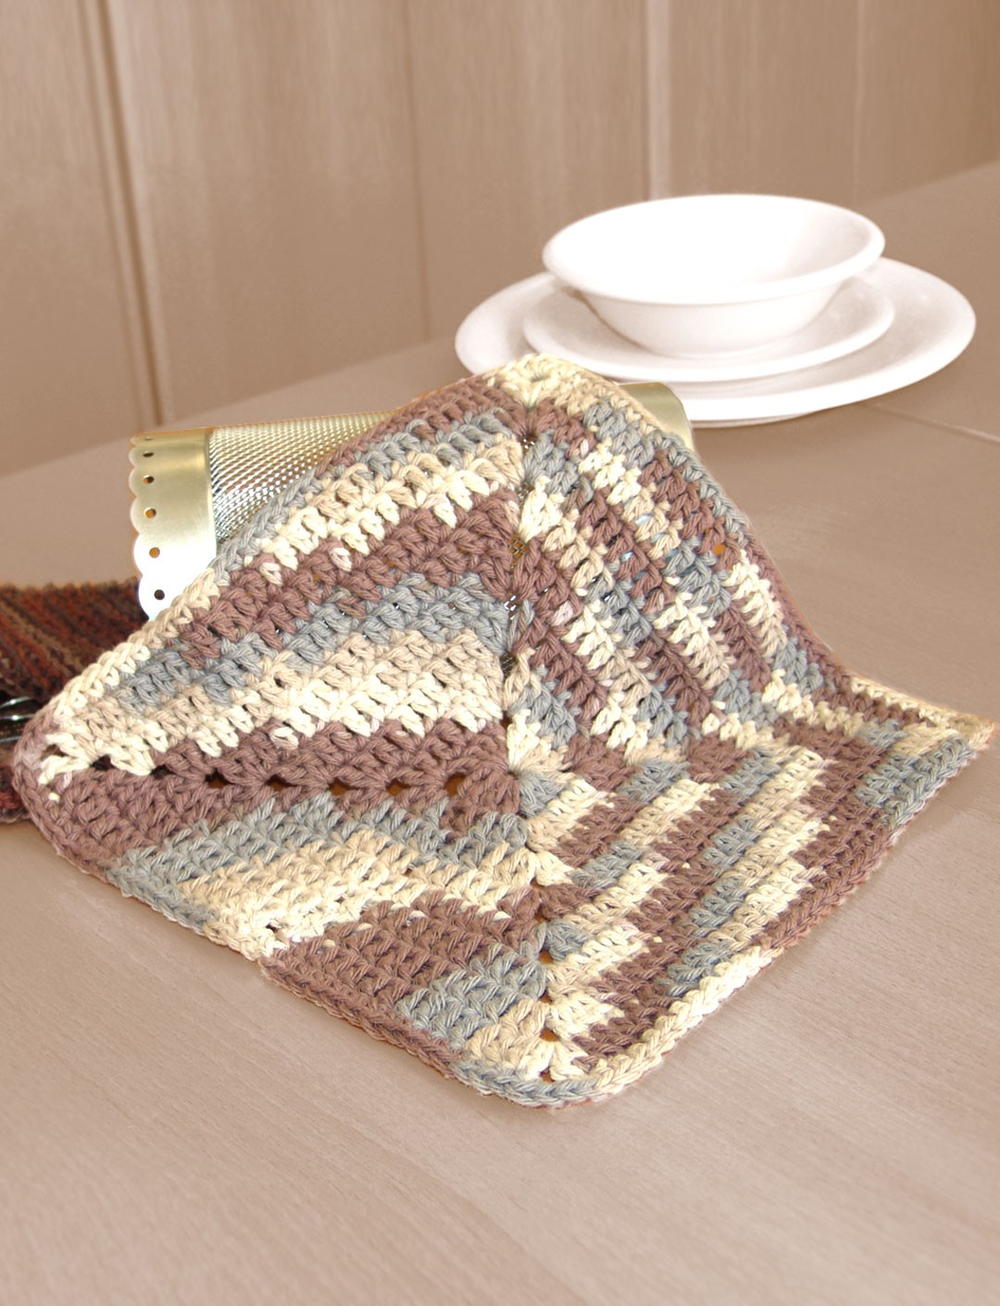 https://irepo.primecp.com/2016/10/303016/Easy-Ombre-Dishcloth-Large_ExtraLarge1000_ID-1913010.jpg?v=1913010